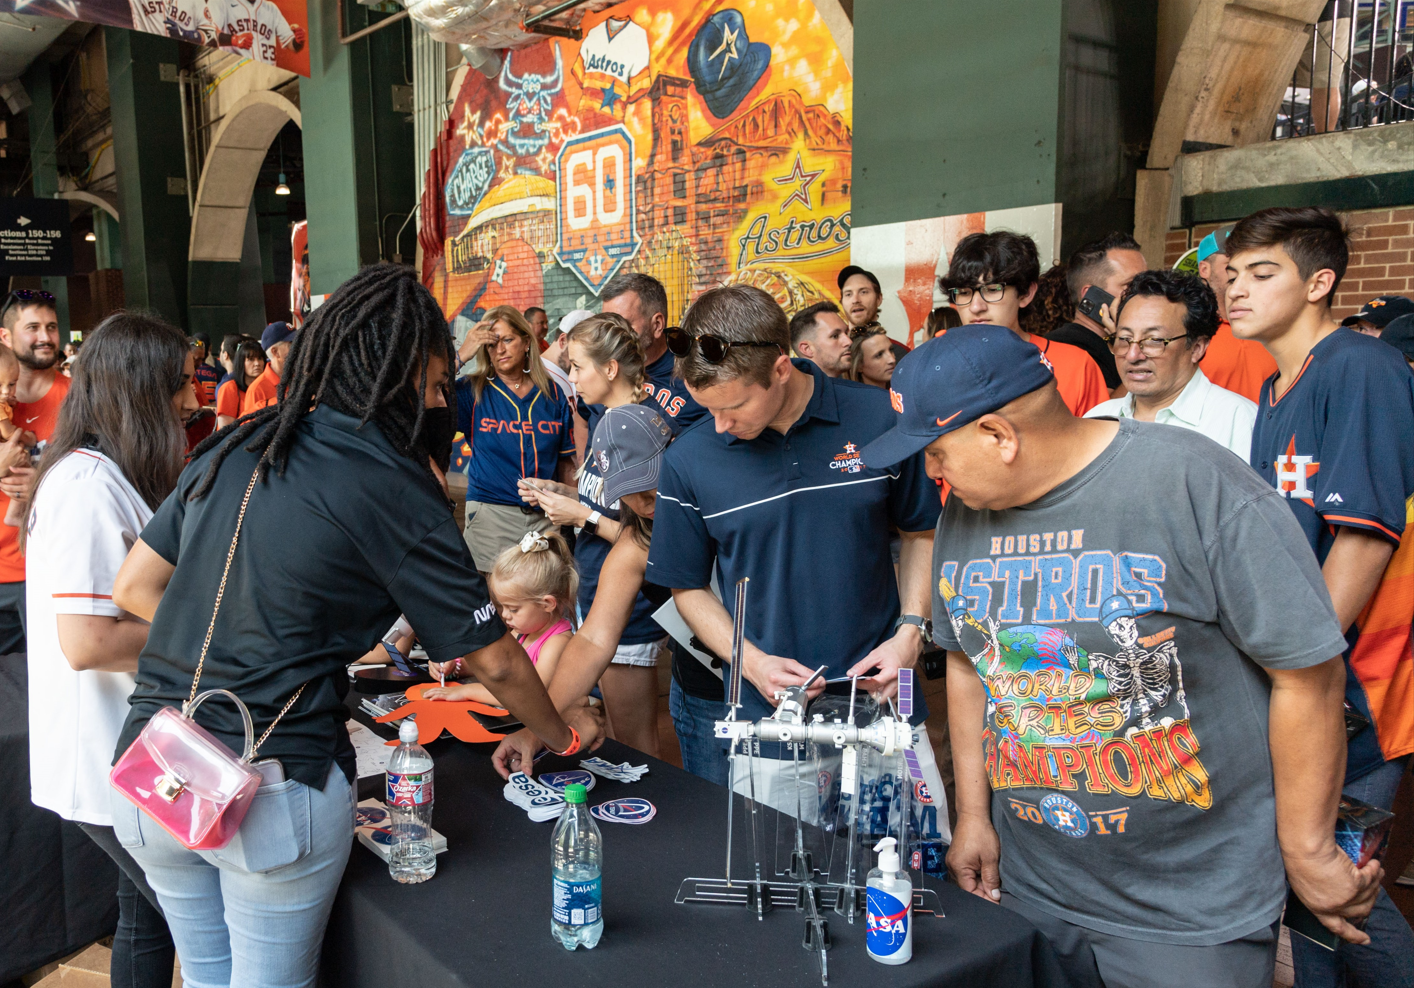 Volunteers representing Gateway interact with fans at the July 16 NASA Night with the Astros game. Look for Gateway to be represented in a big way on Aug. 1. Credits: NASA/Robert Markowitz